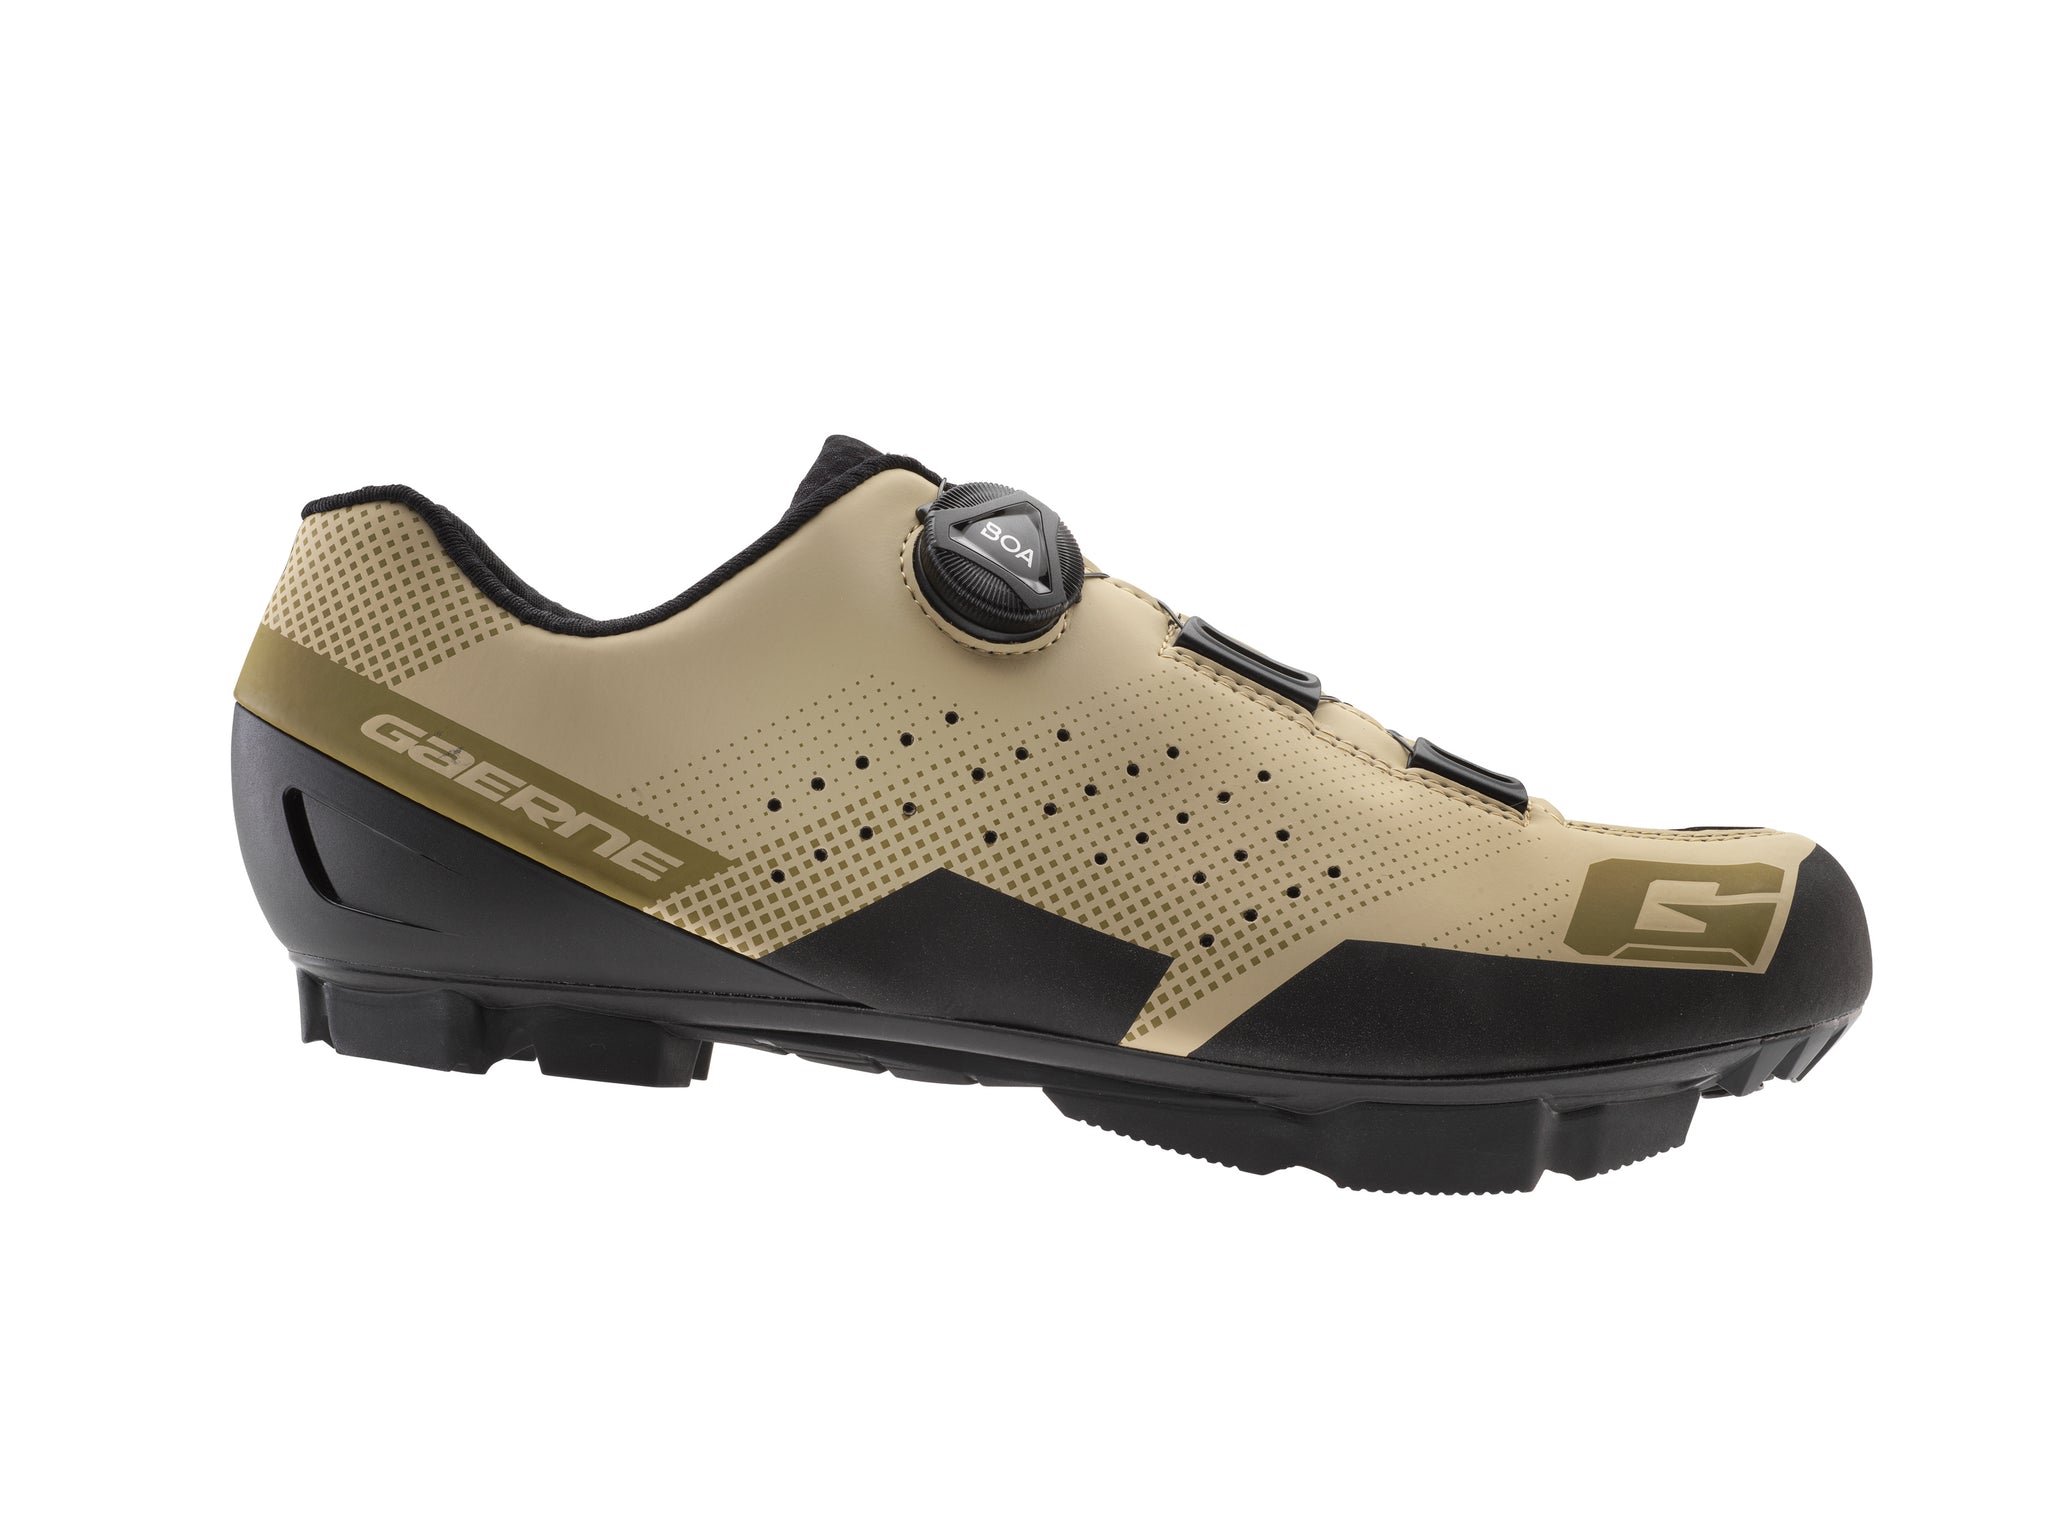 GRAVEL SHOES - GAERNE CYCLING USA